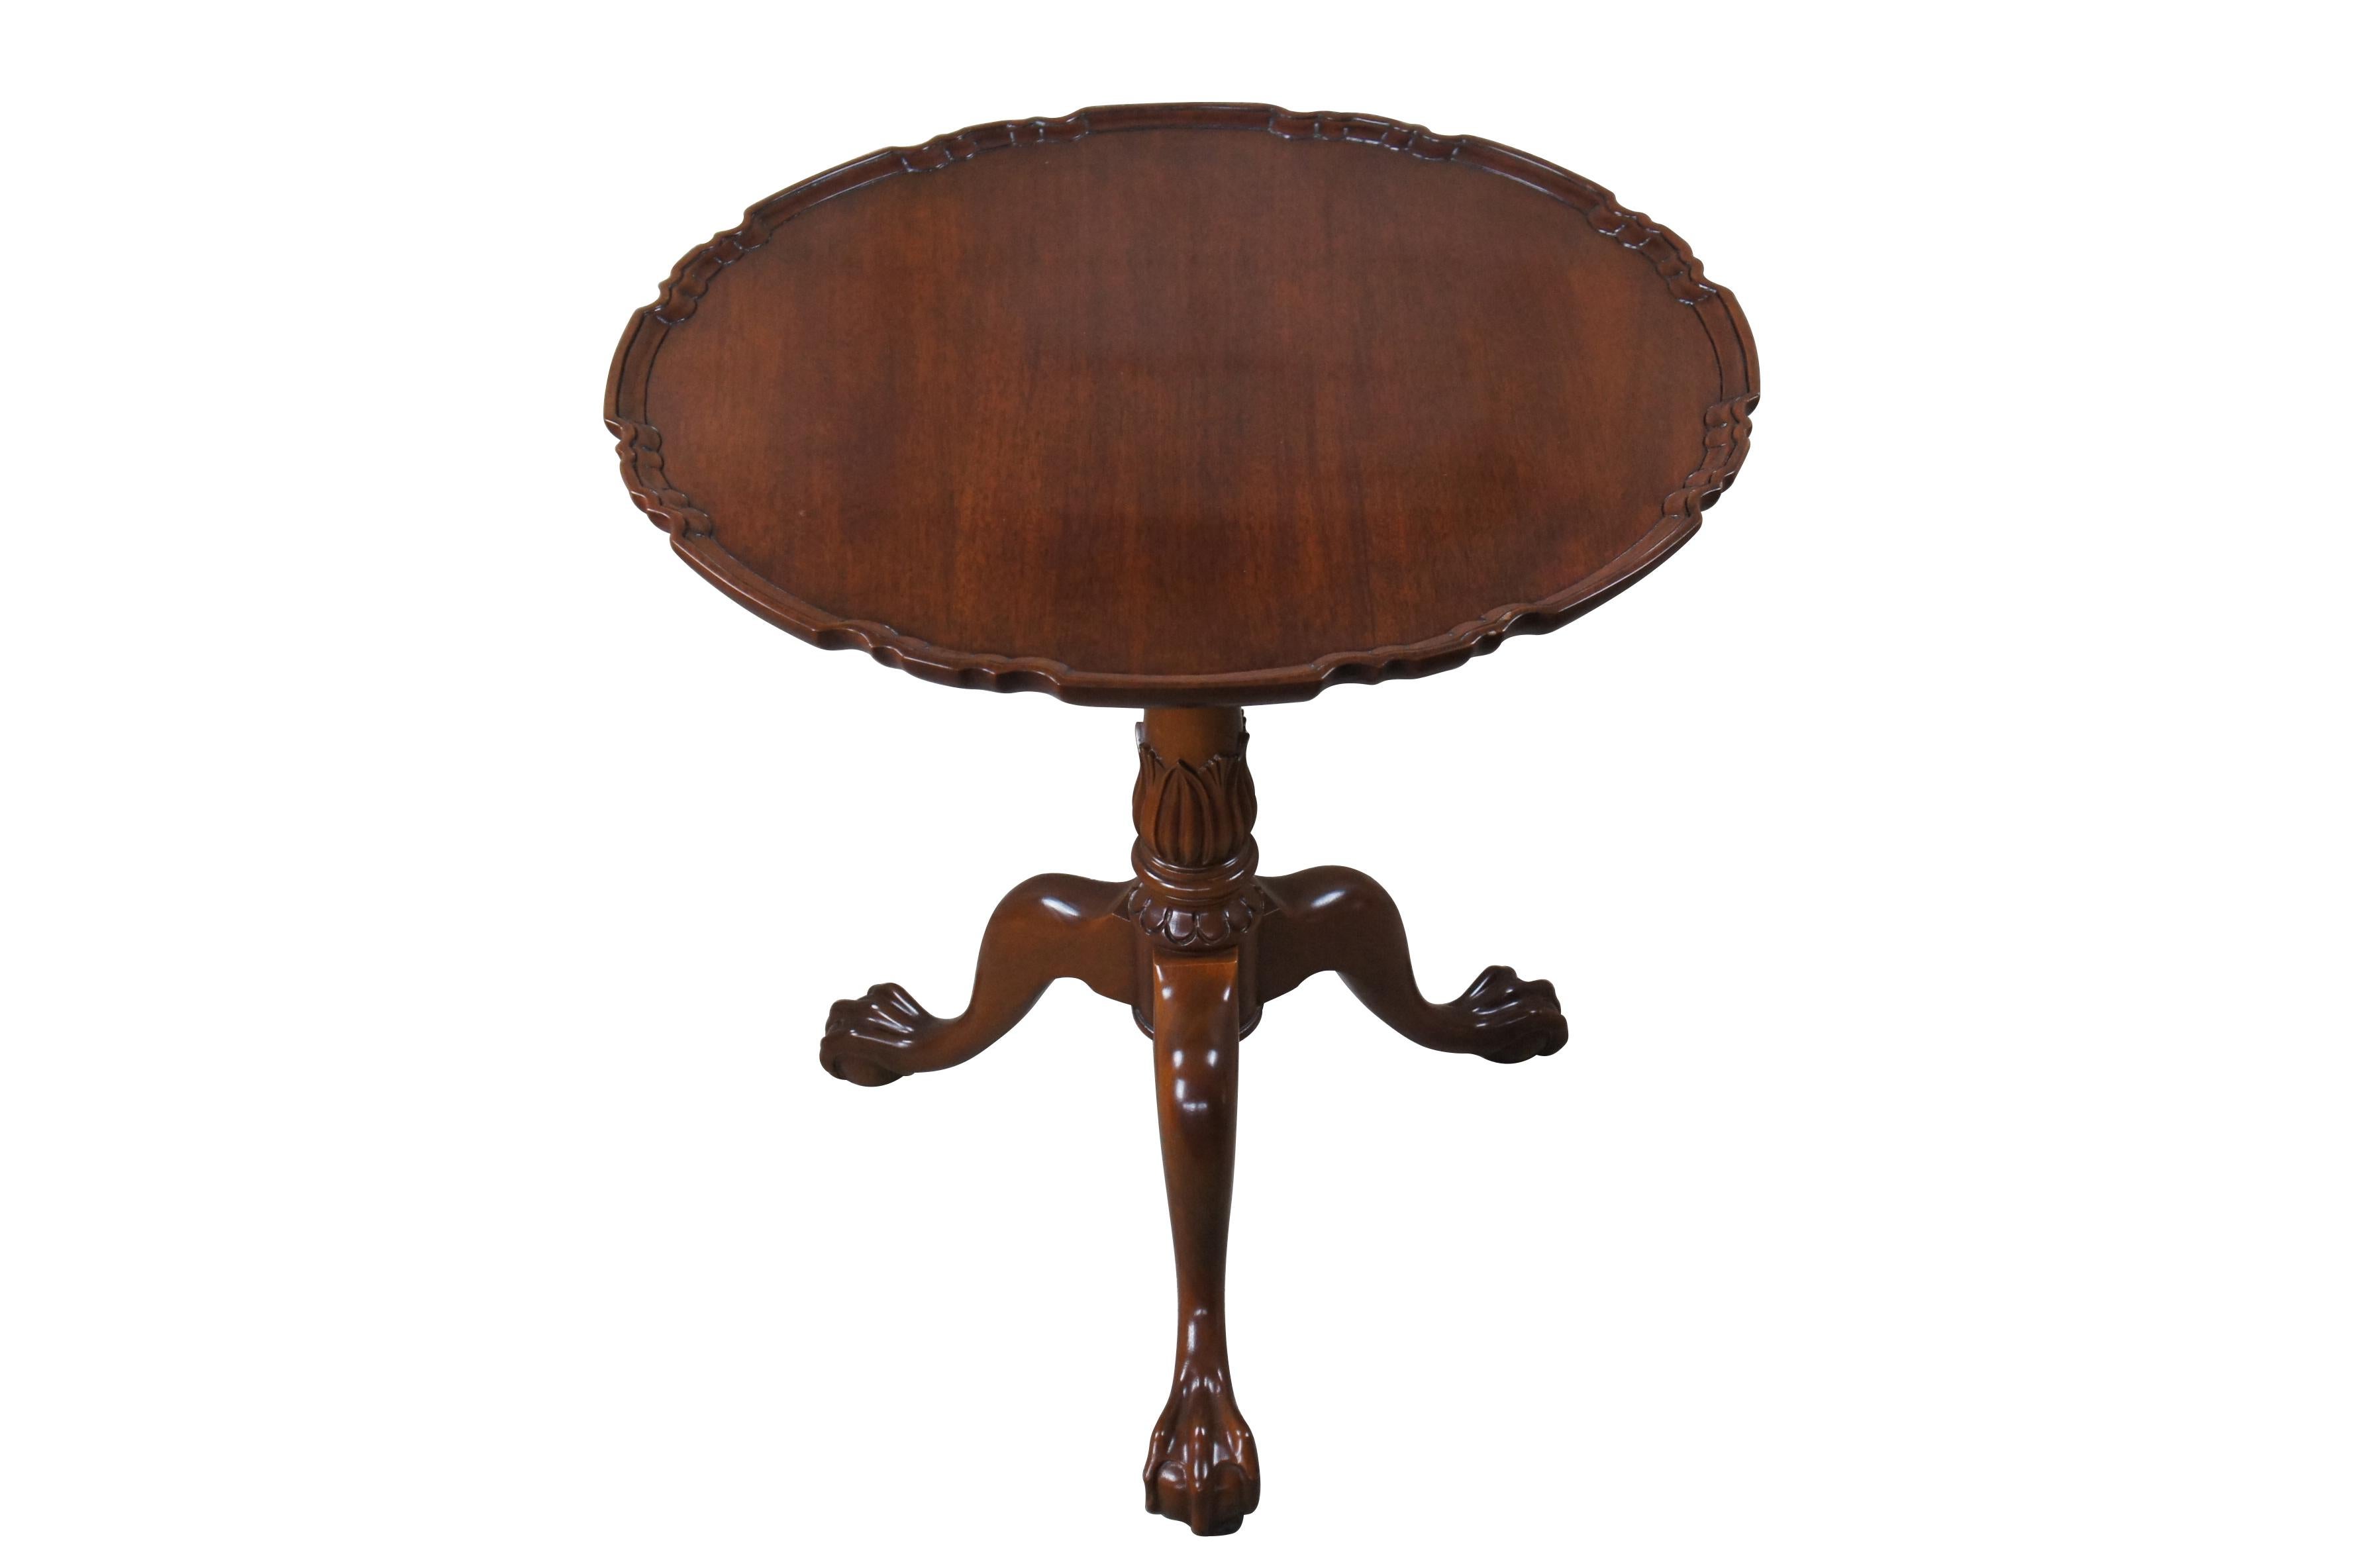 A large Chippendale style scalloped Pie Crust table, circa last quarter 20th century. Made from solid mahogany in the Jefferson Finish. Originally Purchased from William W. Sauer Associates Ltd. Bethesda, MD in 1982. the scalloped top is supported